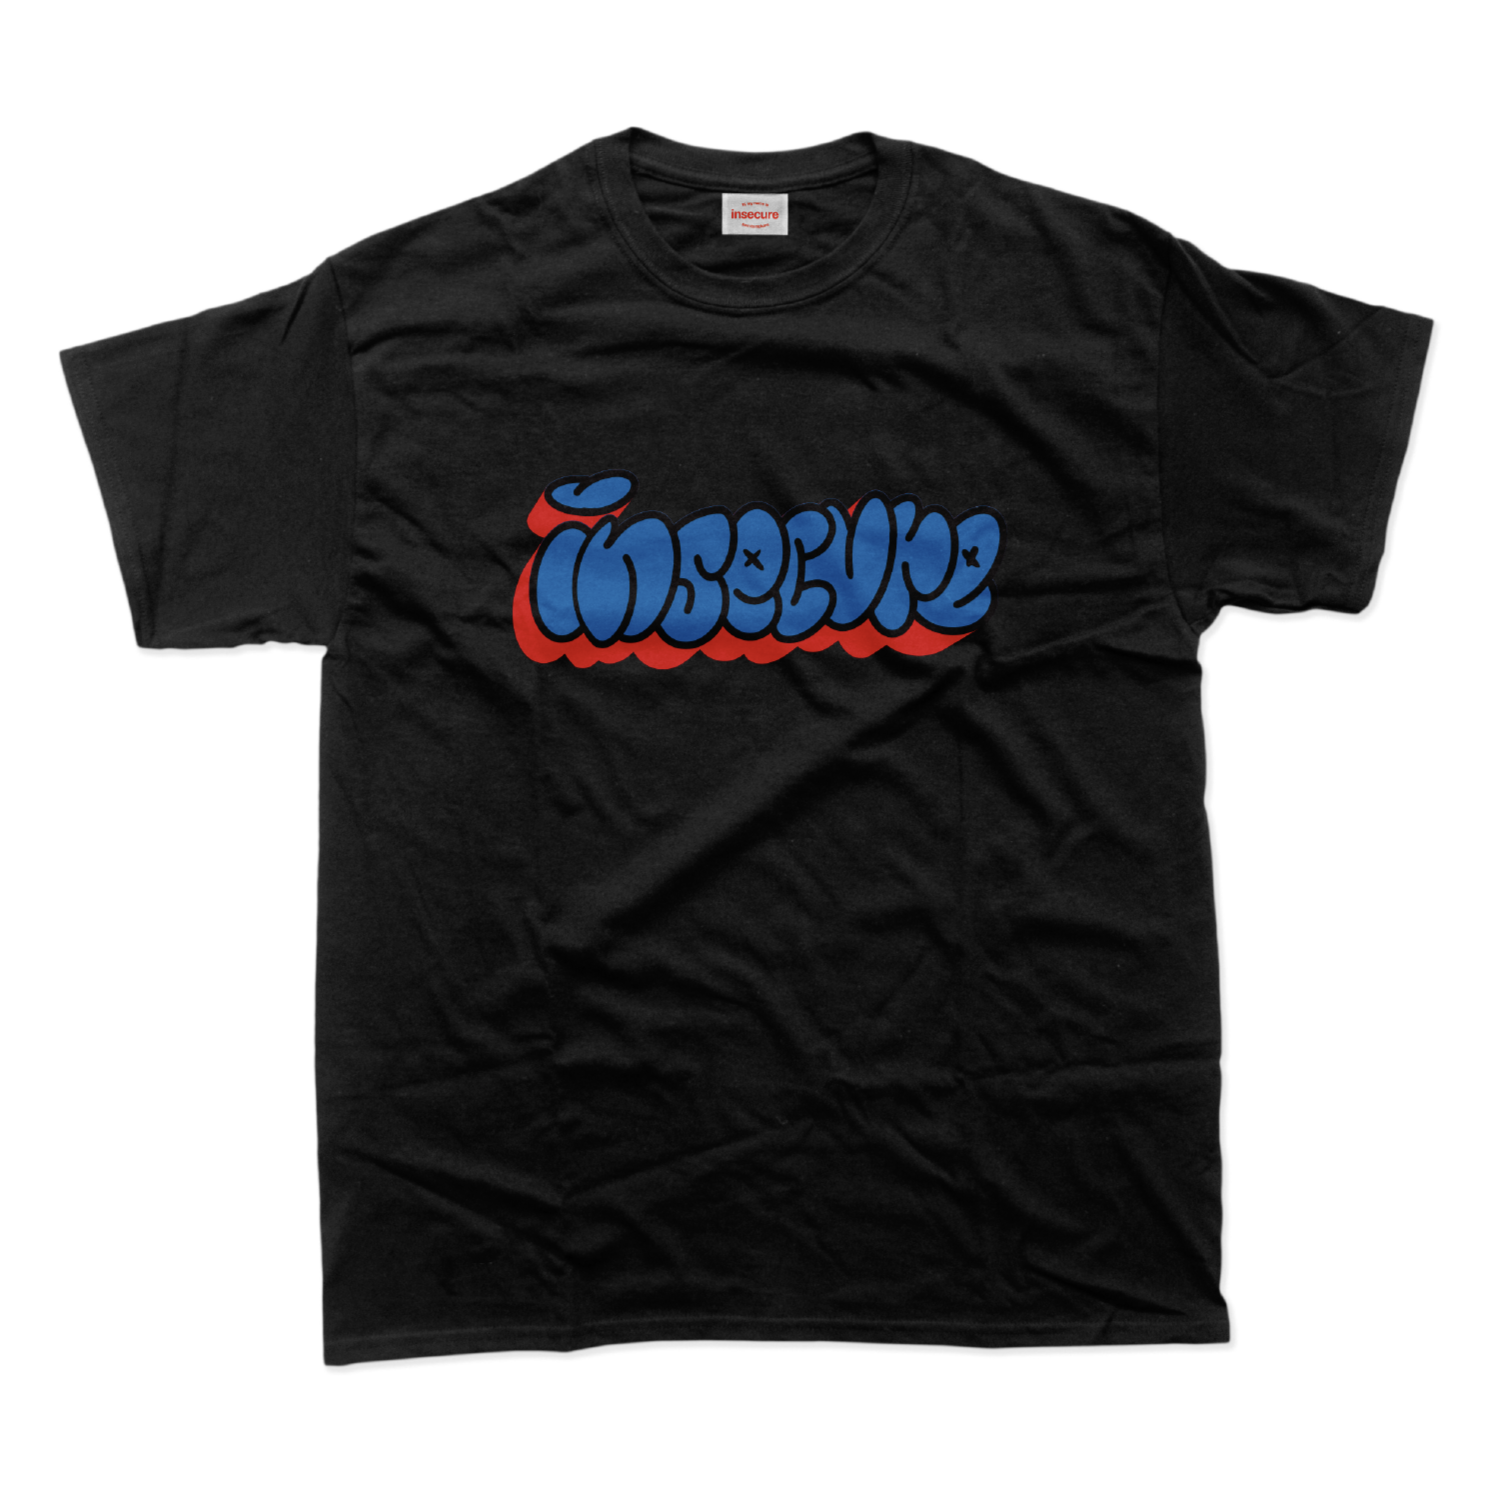 Sam Tompkins - insecure bubble tee